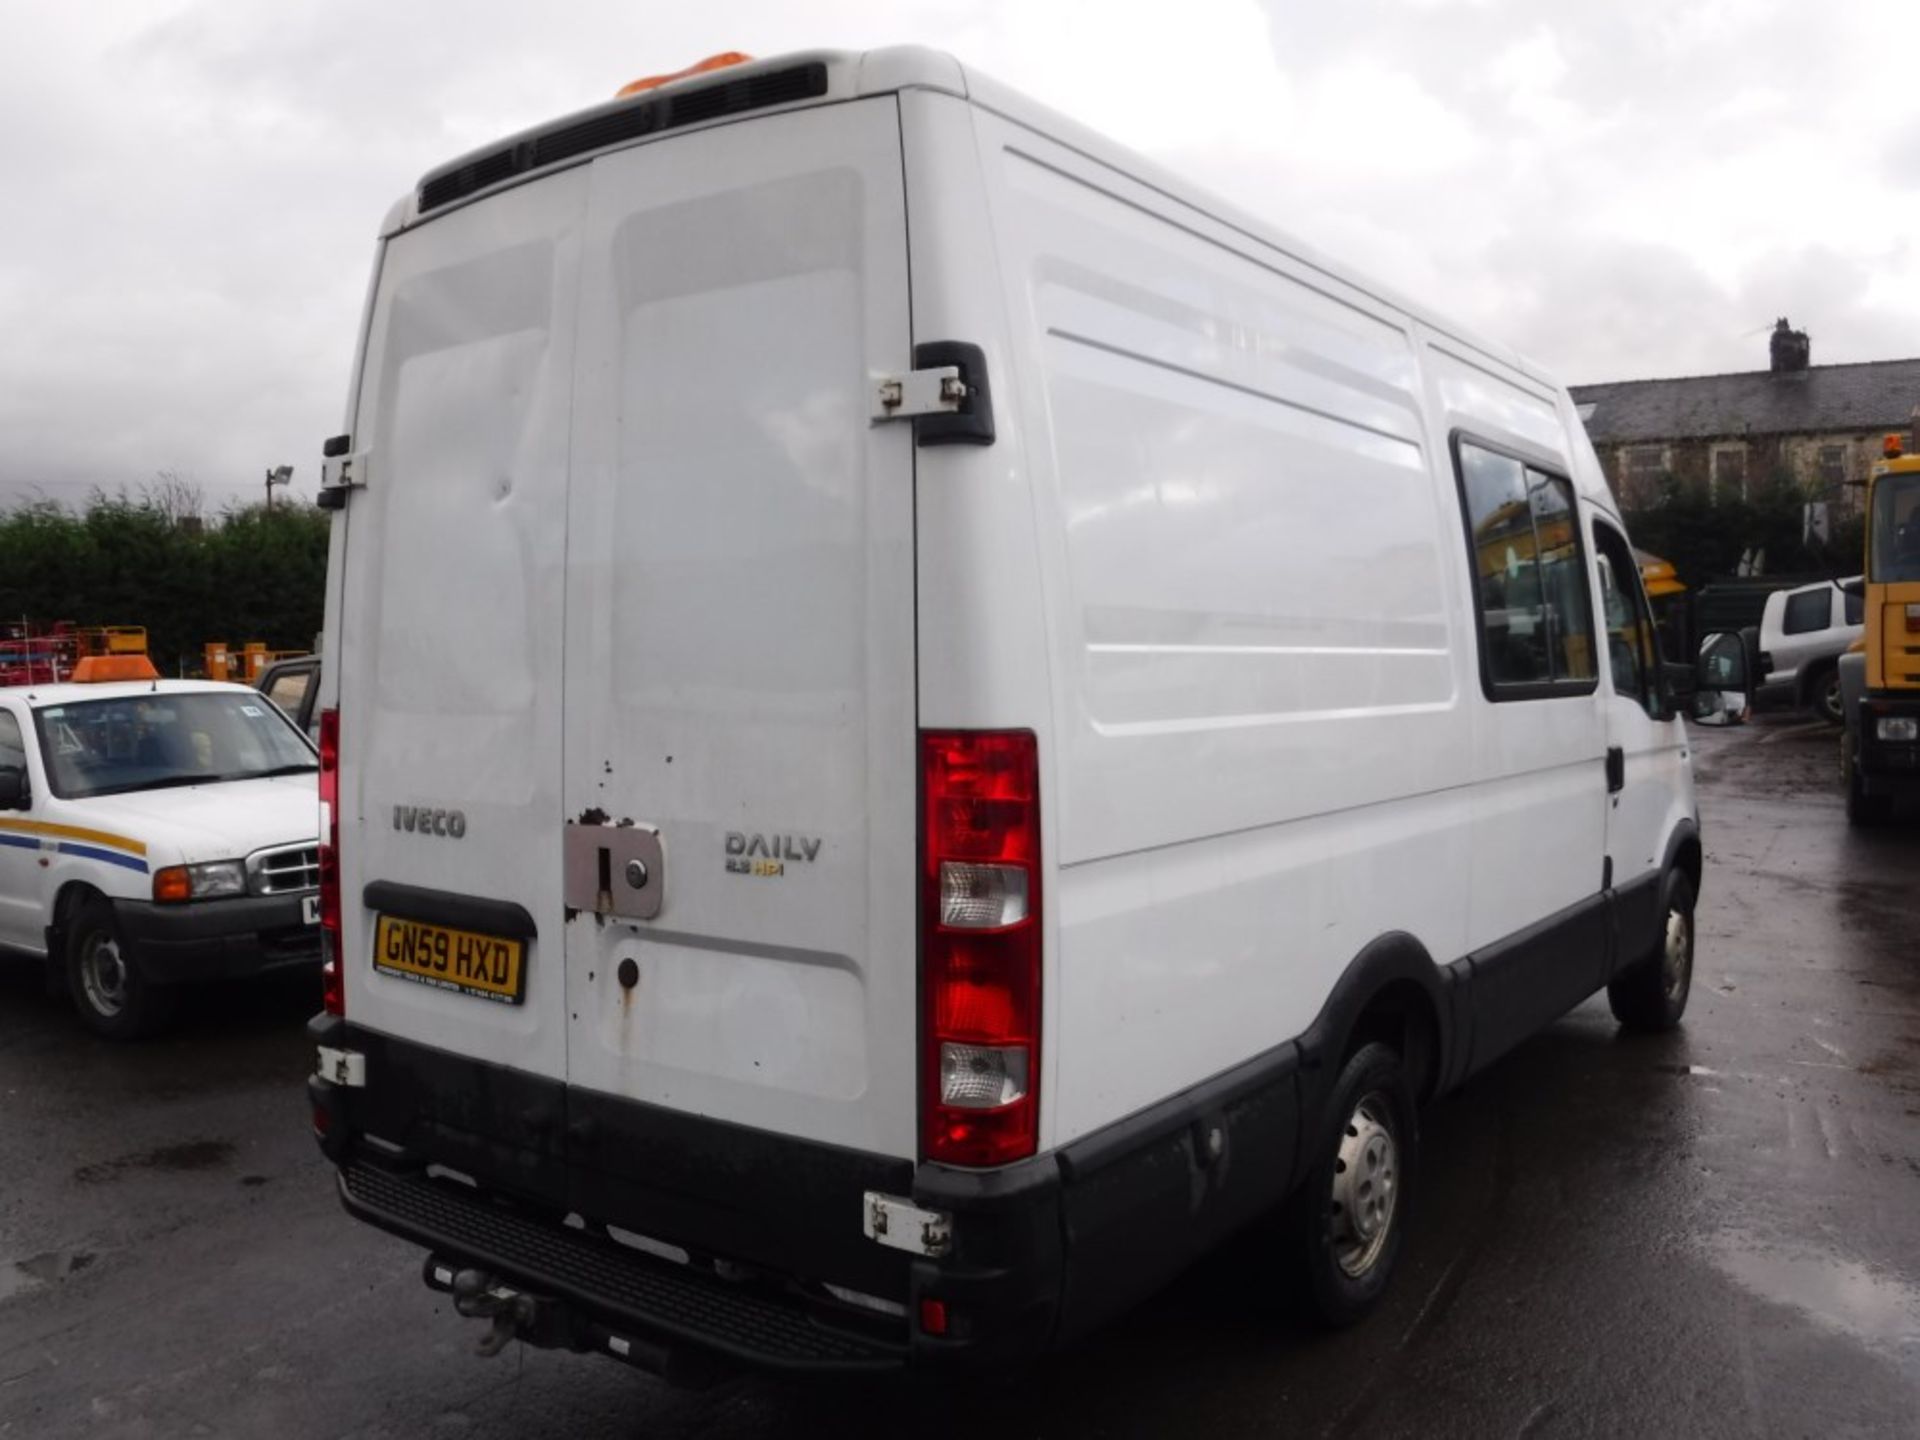 59 reg IVECO DAILY 35S12 MWB, 1ST REG 10/09, 145224M WARRANTED, V5 HERE, 1 OWNER FROM NEW [+ VAT] - Image 4 of 6